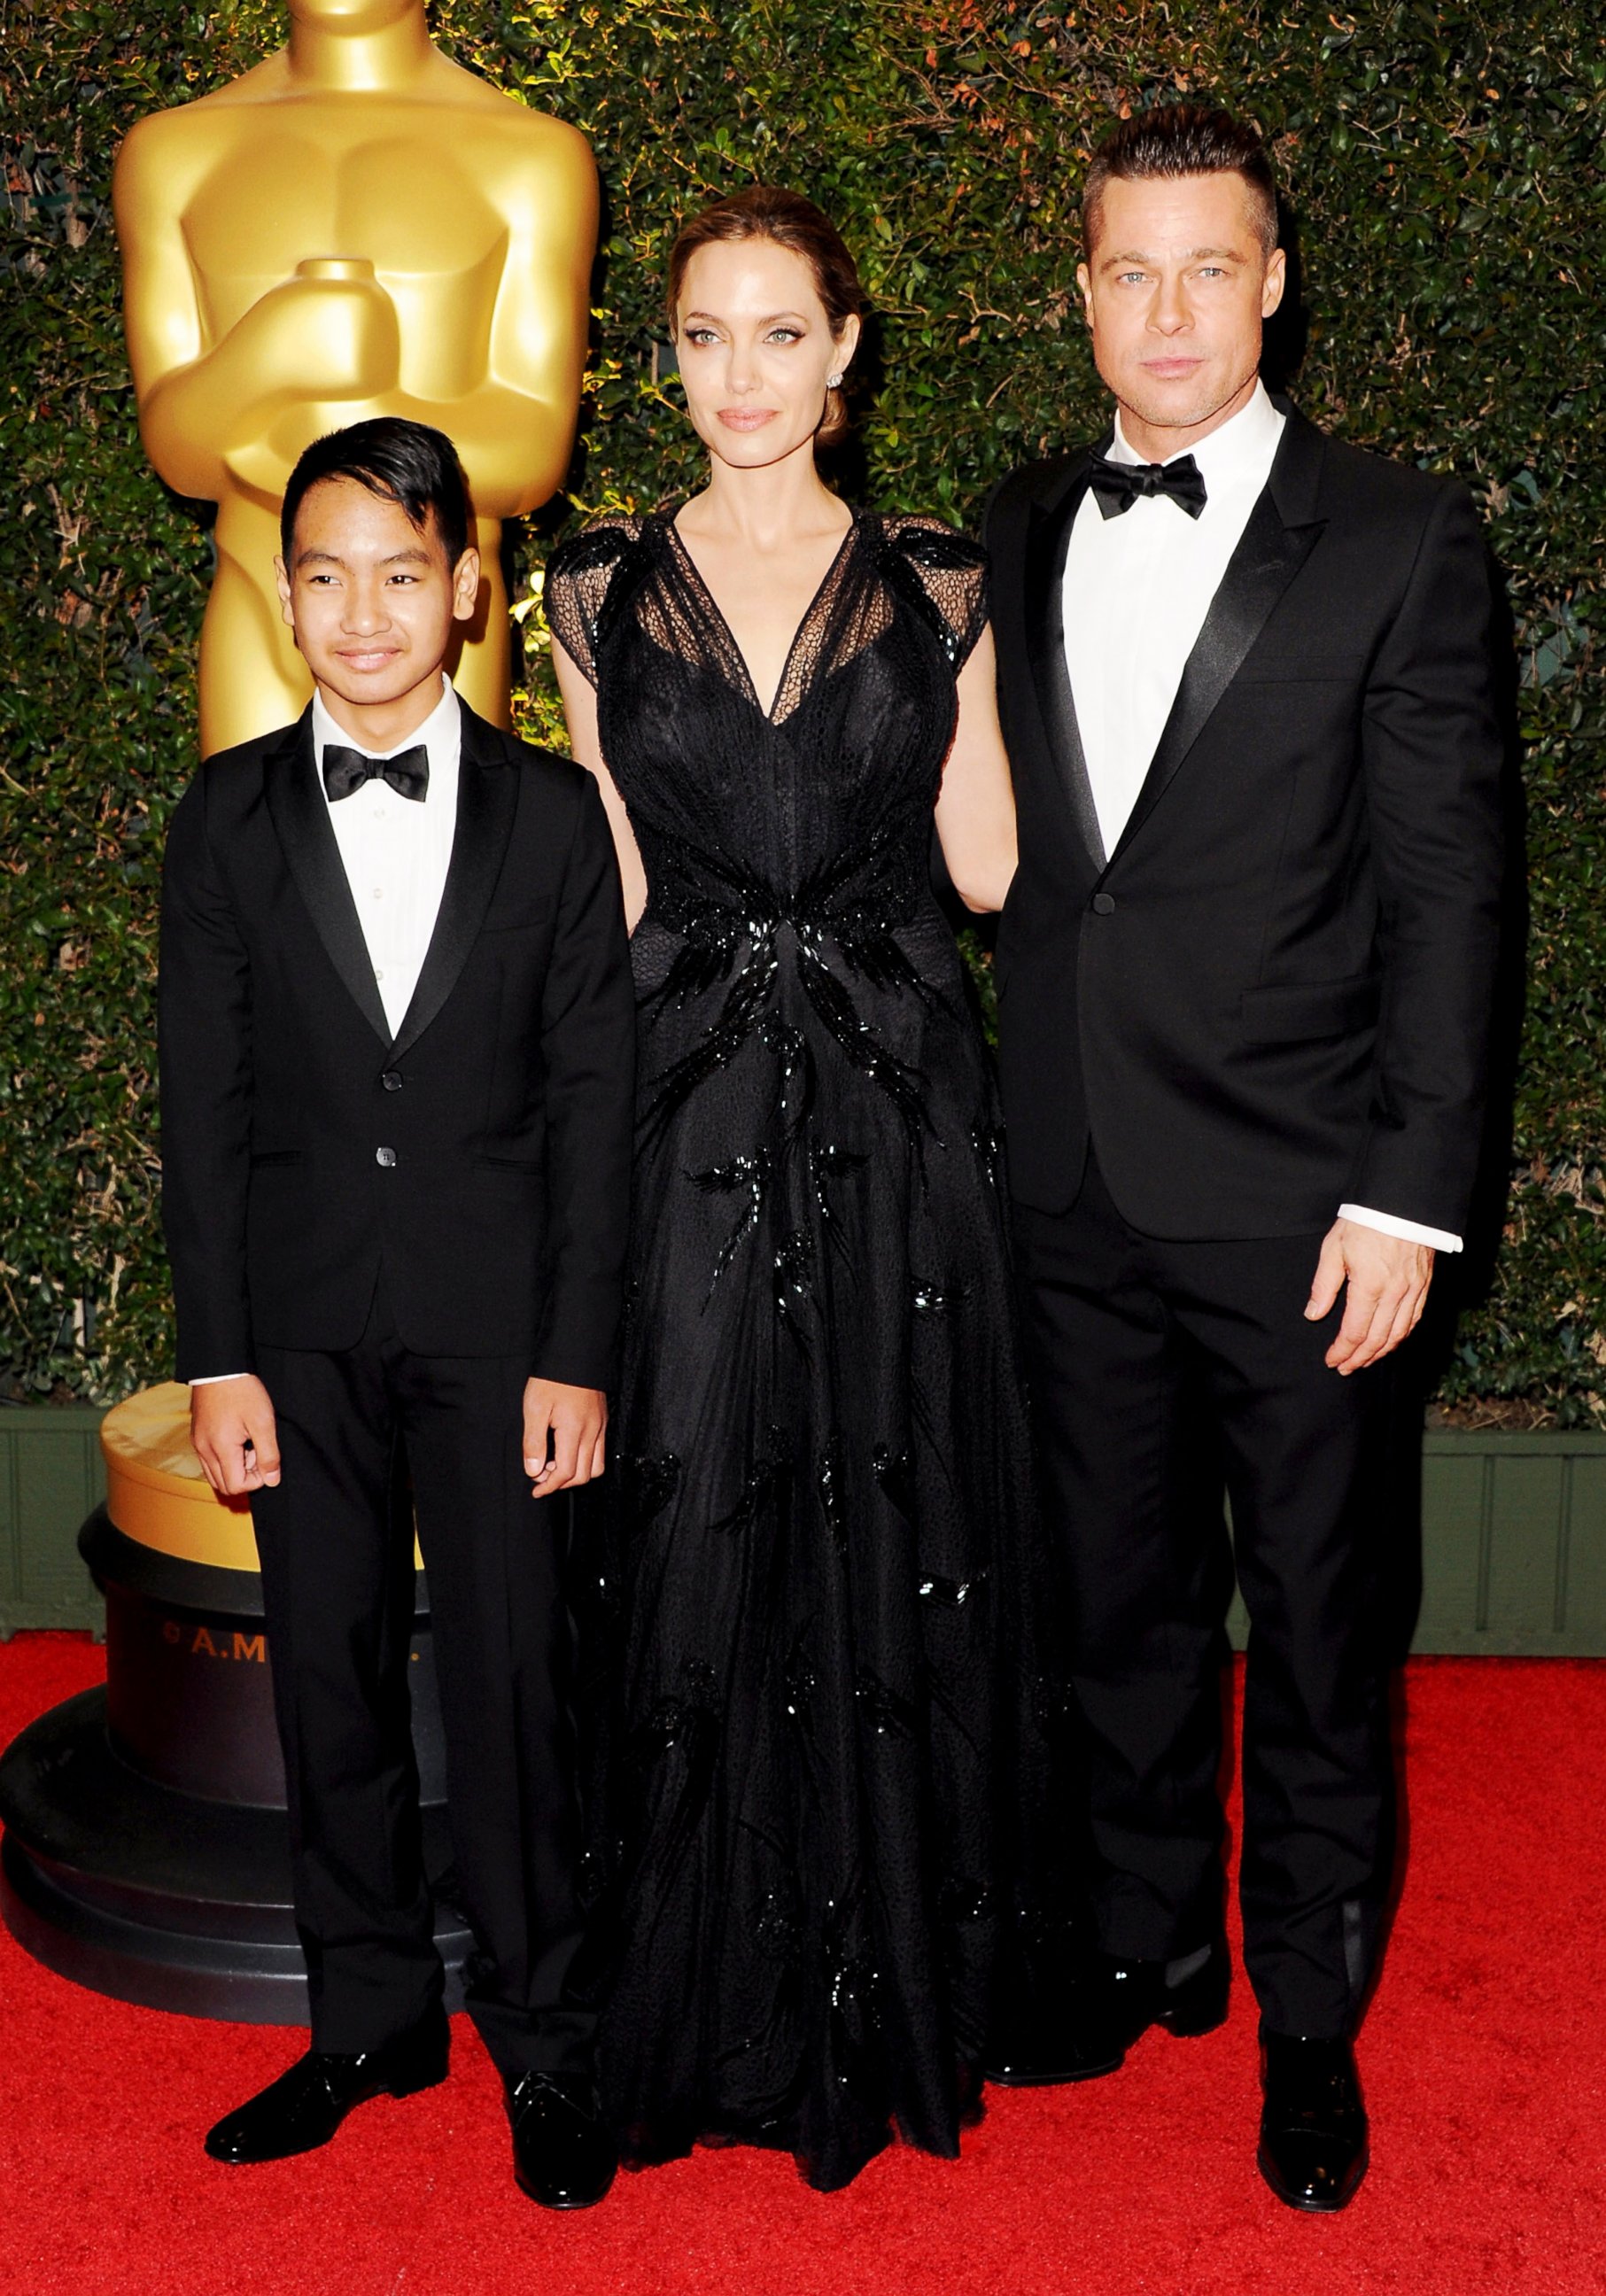 PHOTO: Brad Pitt, actress Angelina Jolie and son Maddox Jolie-Pitt arrive at The Board Of Governors Of The Academy Of Motion Picture Arts And Sciences' Governor Awards at Dolby Theatre, Nov. 16, 2013, in Hollywood, Calif. 